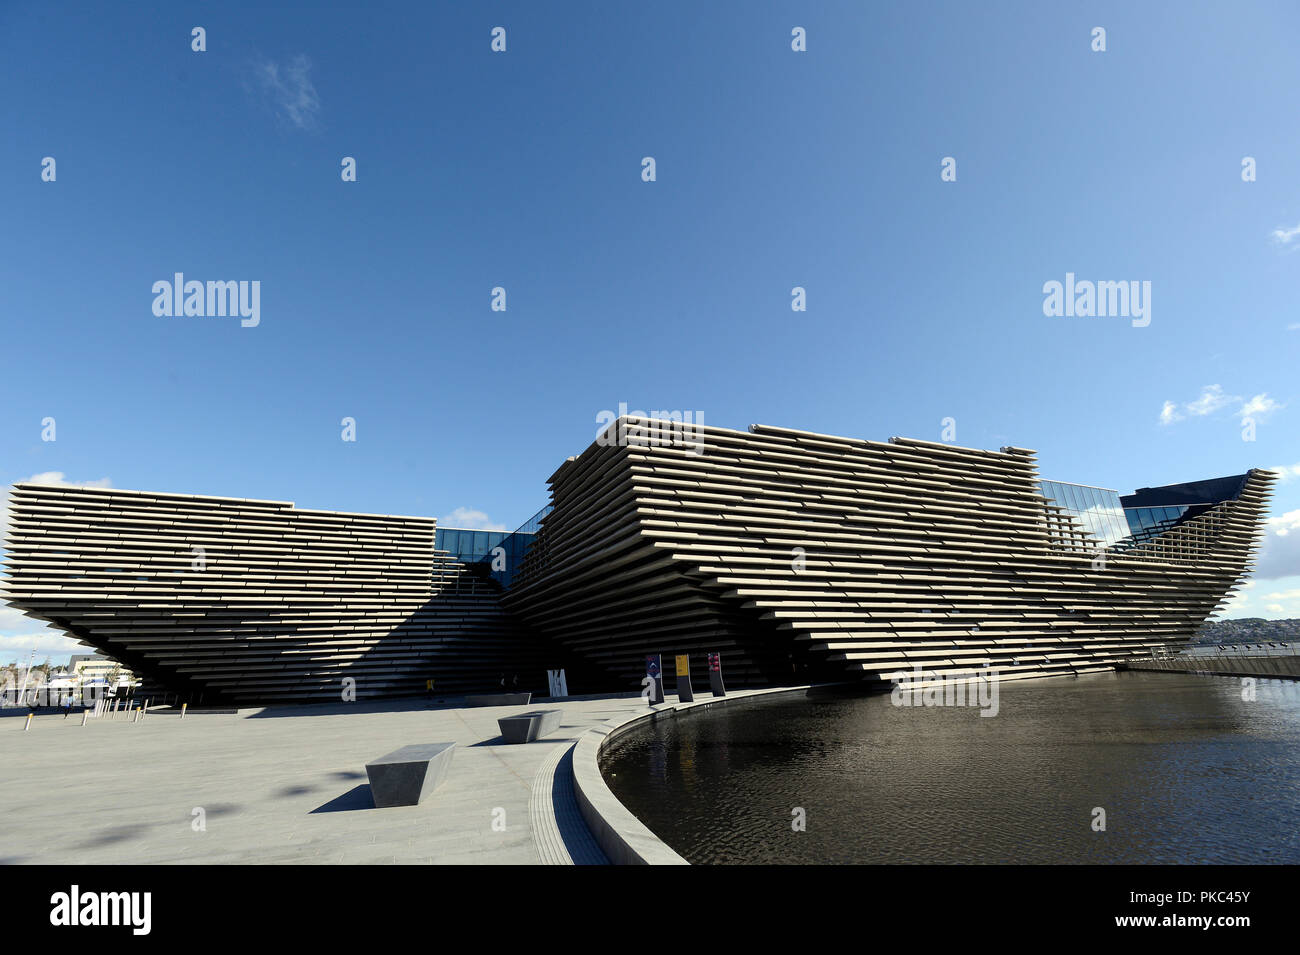 Dundee, Scotland, United Kingdom, 12, September, 2018. The new V & A Dundee museum ahead of the grand opening on Saturday, September 15, 2018. © Ken Jack / Alamy Live News Stock Photo